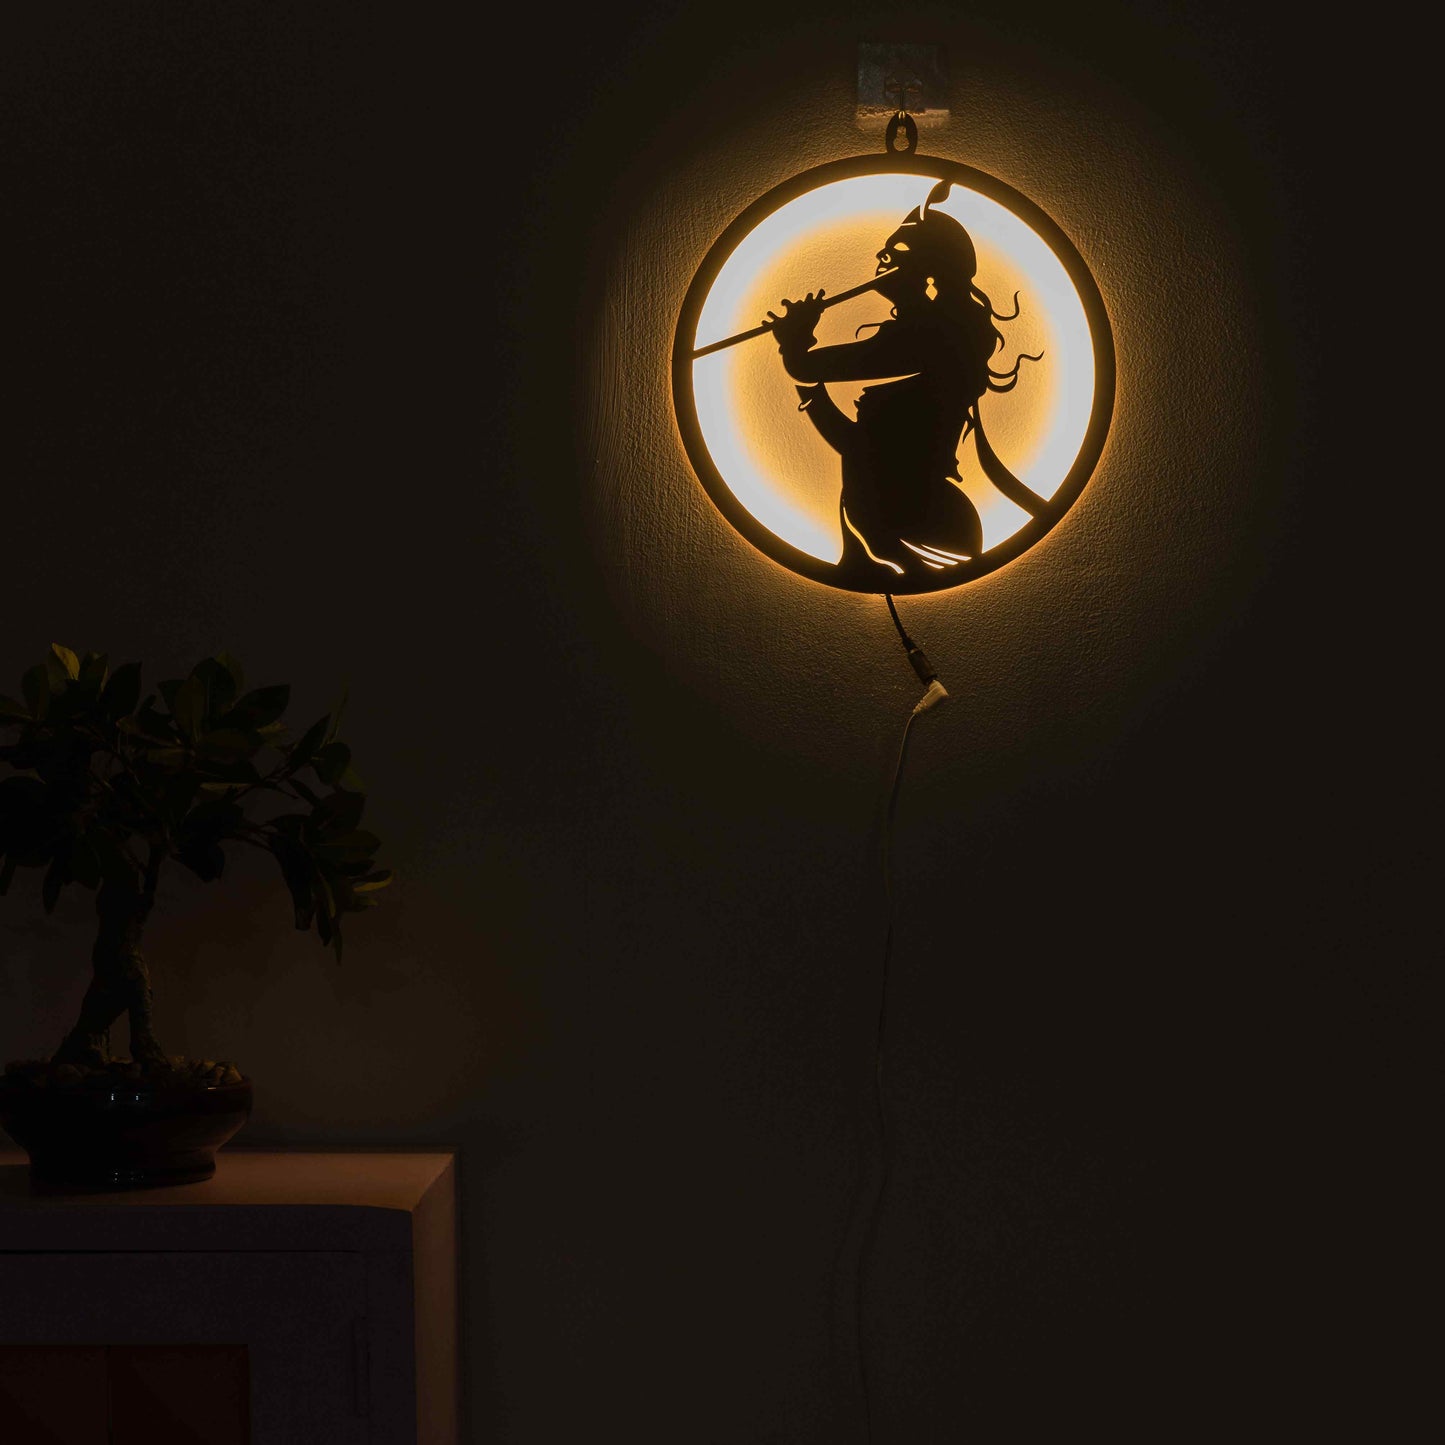 Kanha with Flute LED Wall Decor Light - Small